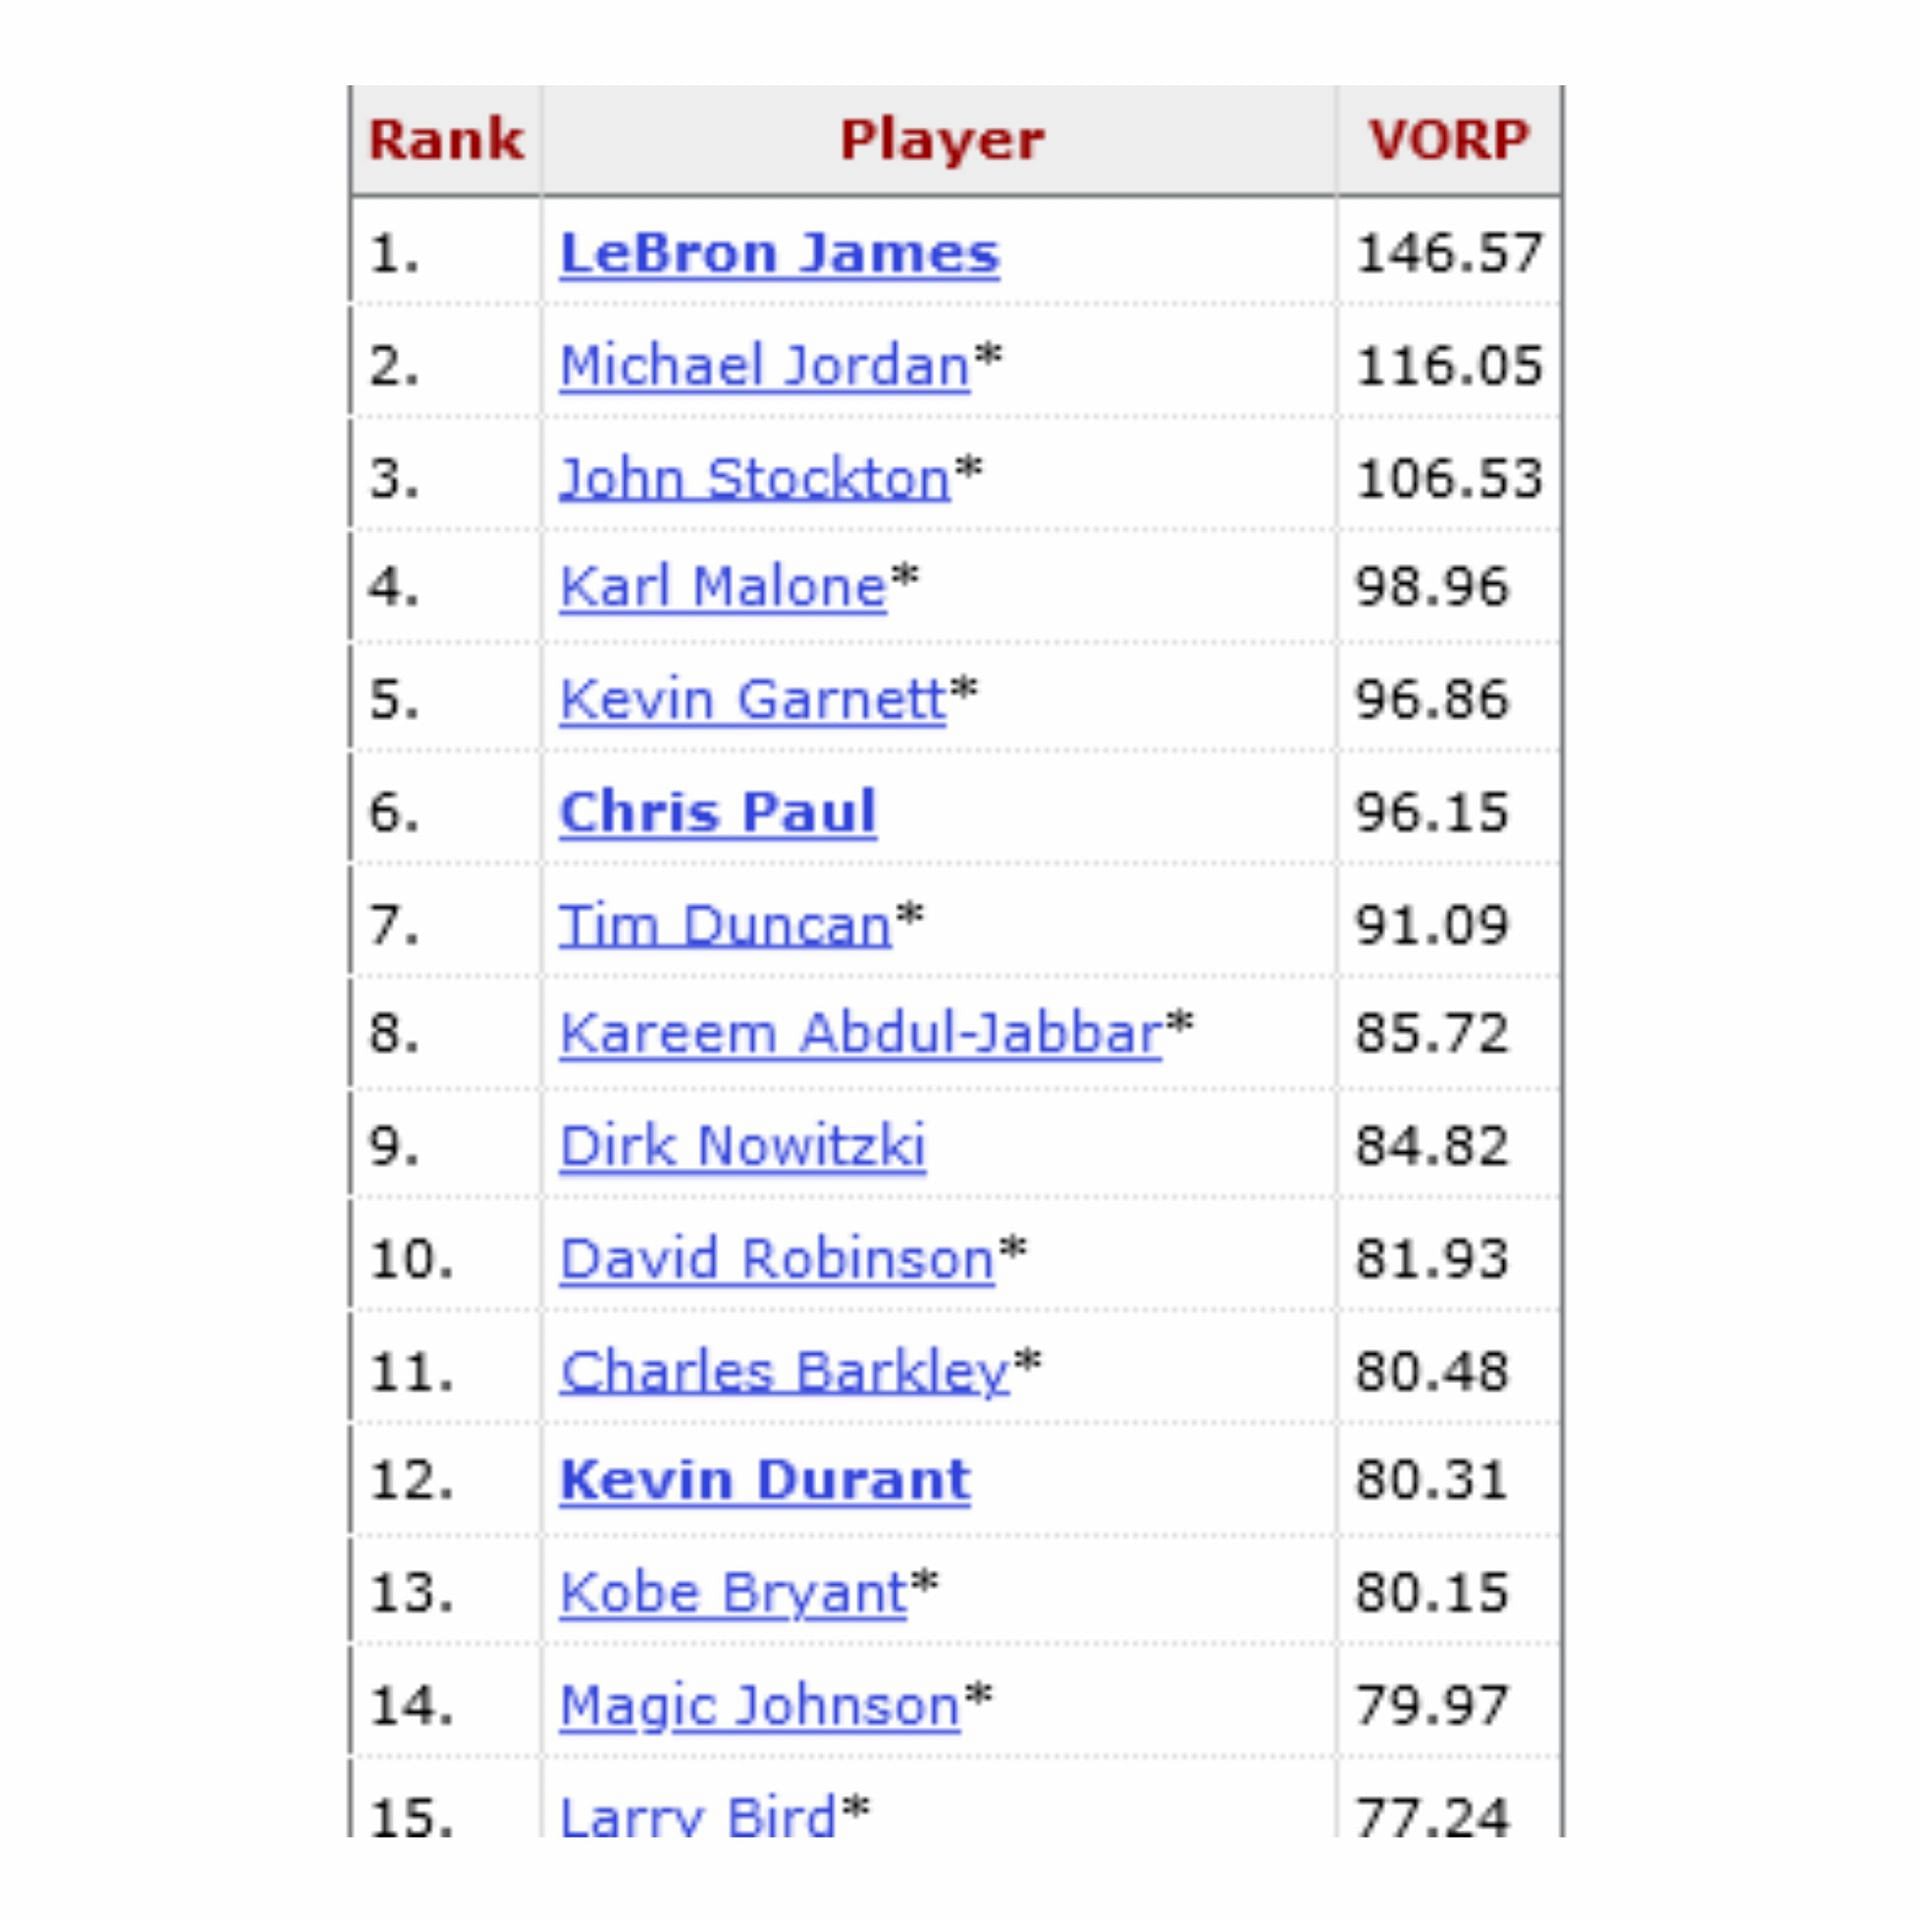 VORP LIST COURTESY OF BASKETBALL REFERENCE